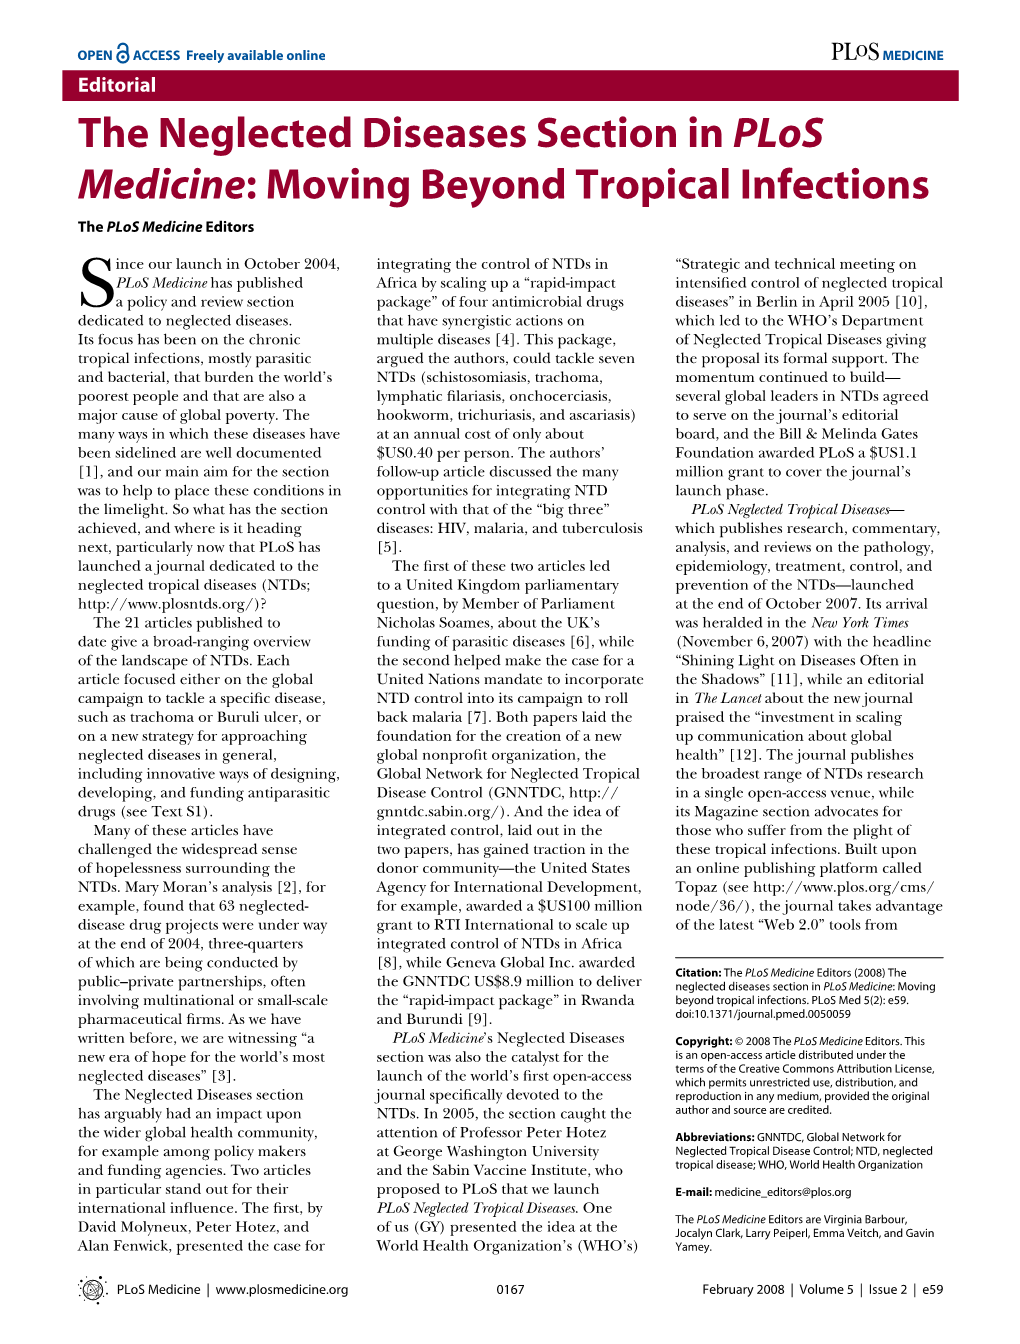 The Neglected Diseases Section in Plos Medicine: Moving Beyond Tropical Infections the Plos Medicine Editors